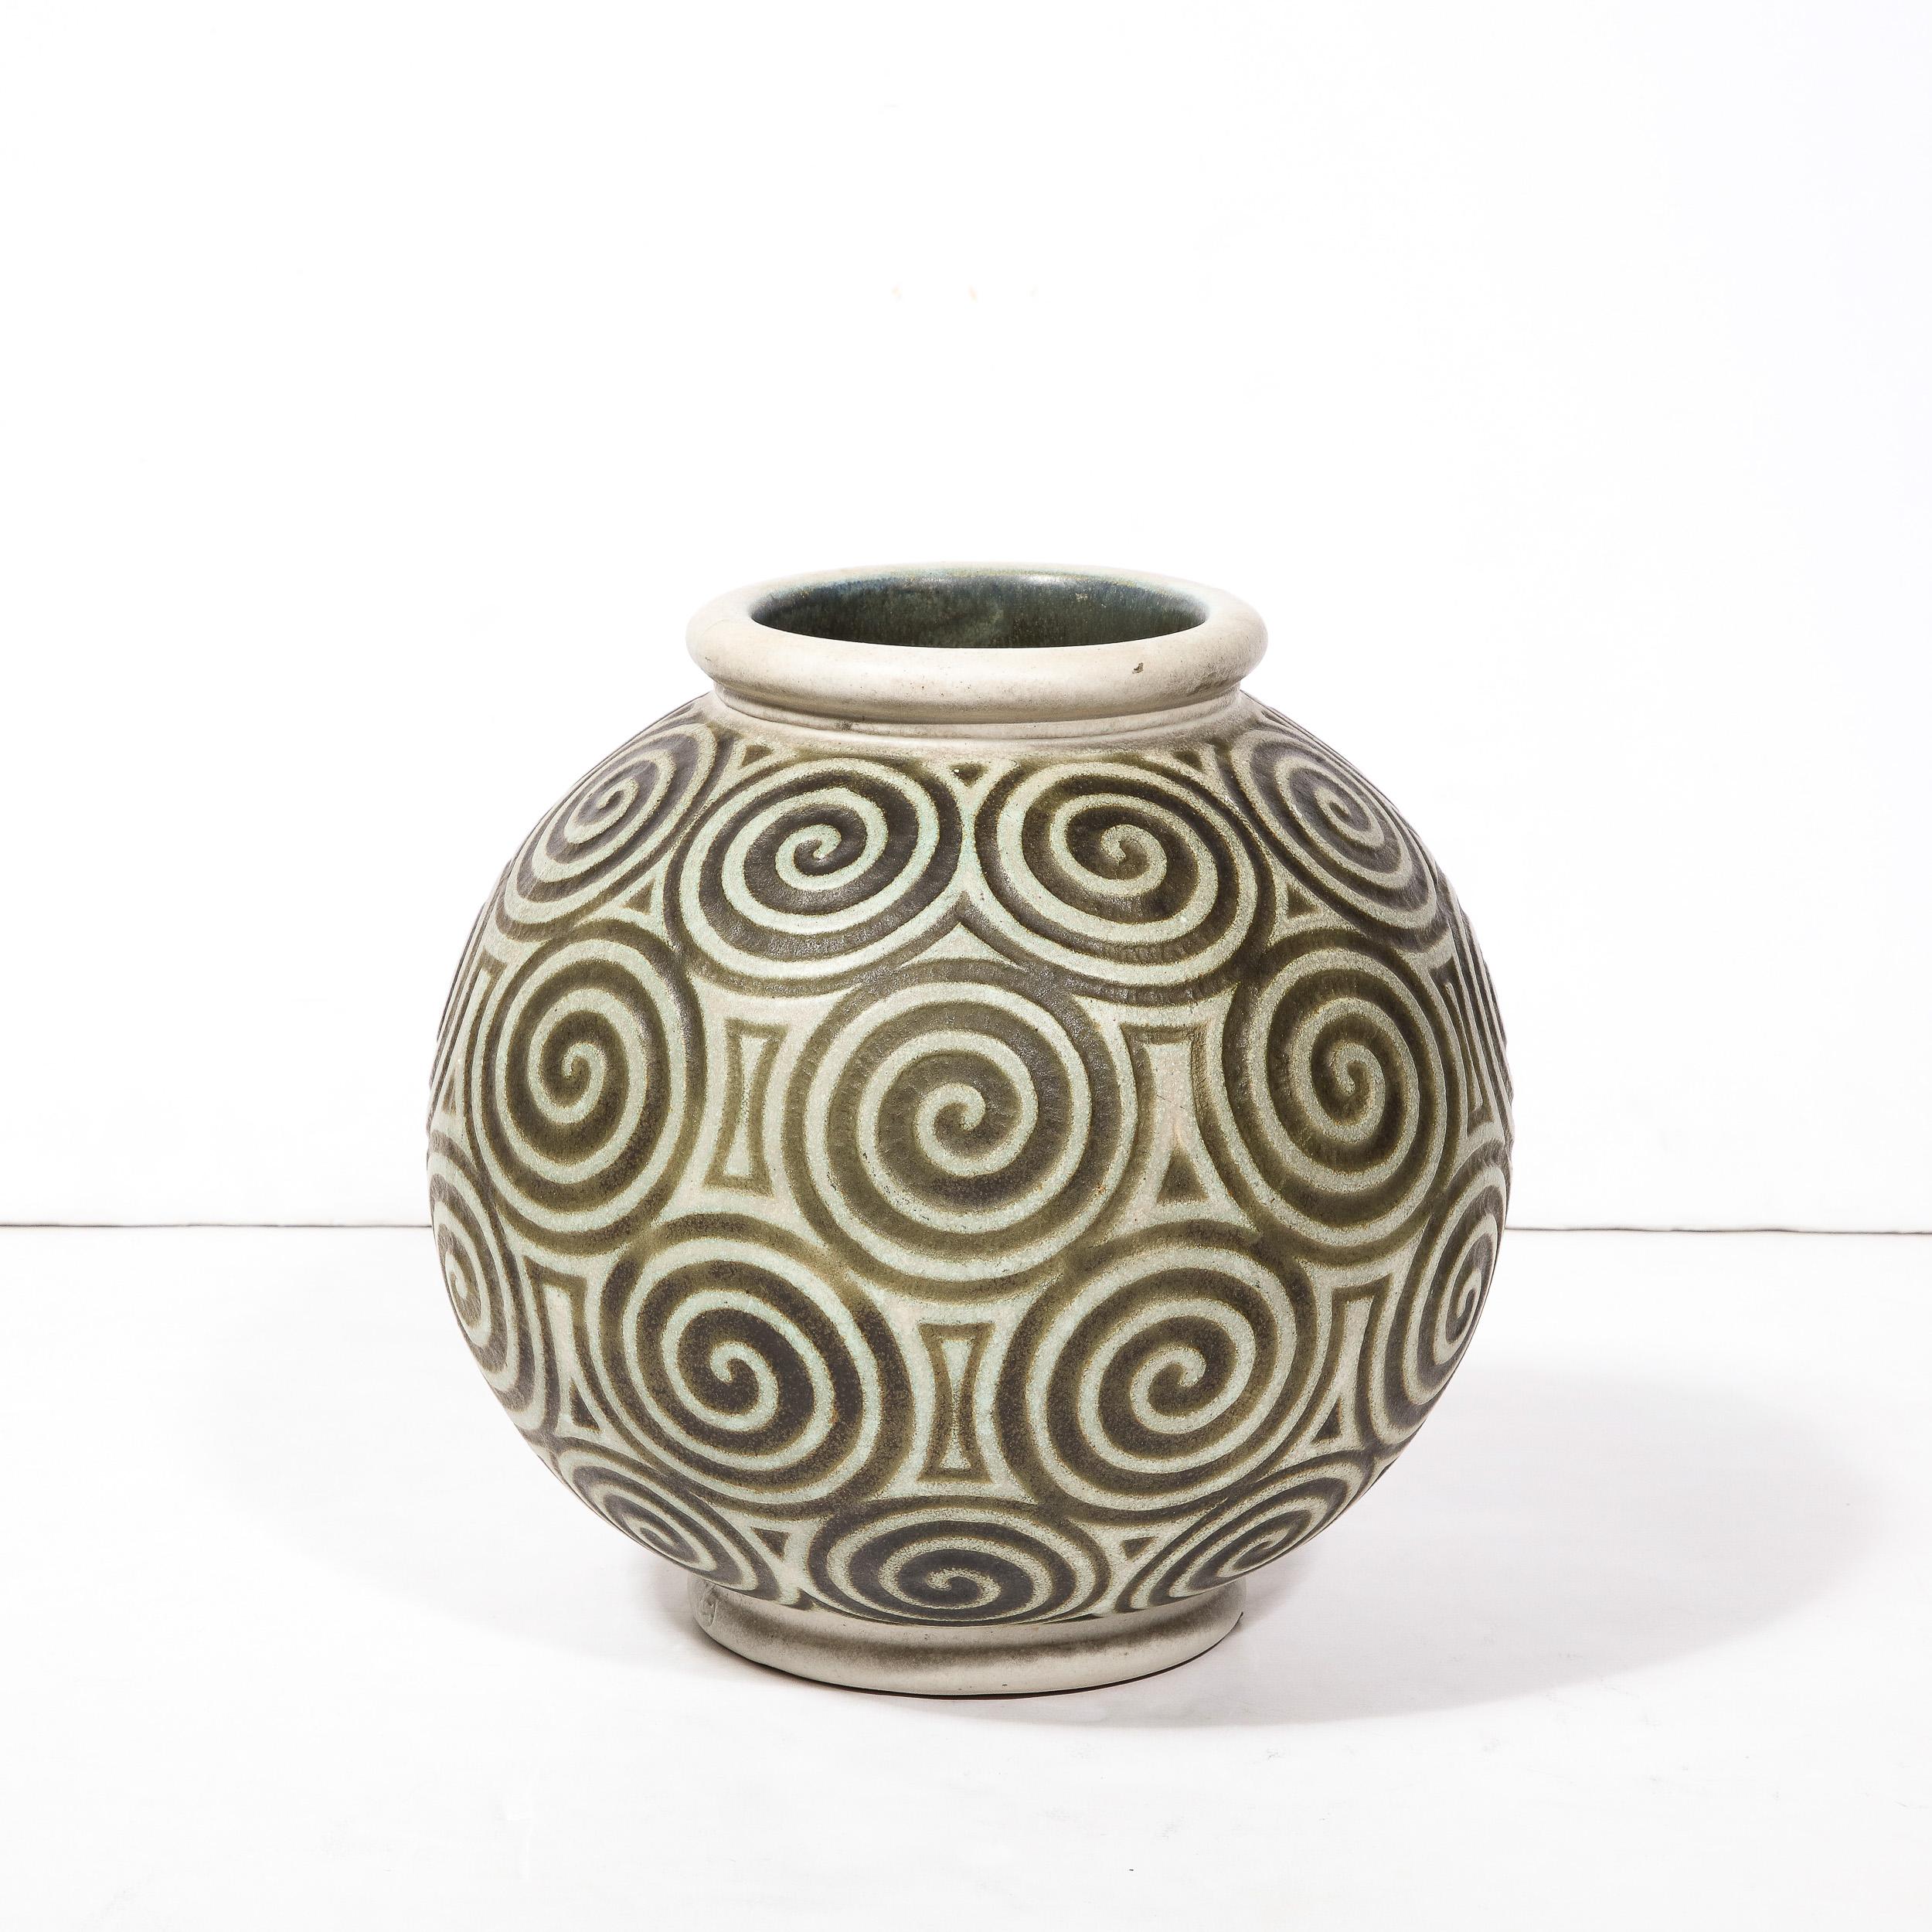 This striking ceramic vase originates from nancy, France Circa 1925. Spherical in form with two coiled bands composing the mouth and base of the vase, this Art Deco piece utilizes a repeating motif of relief carved spirals in contrasting hues of